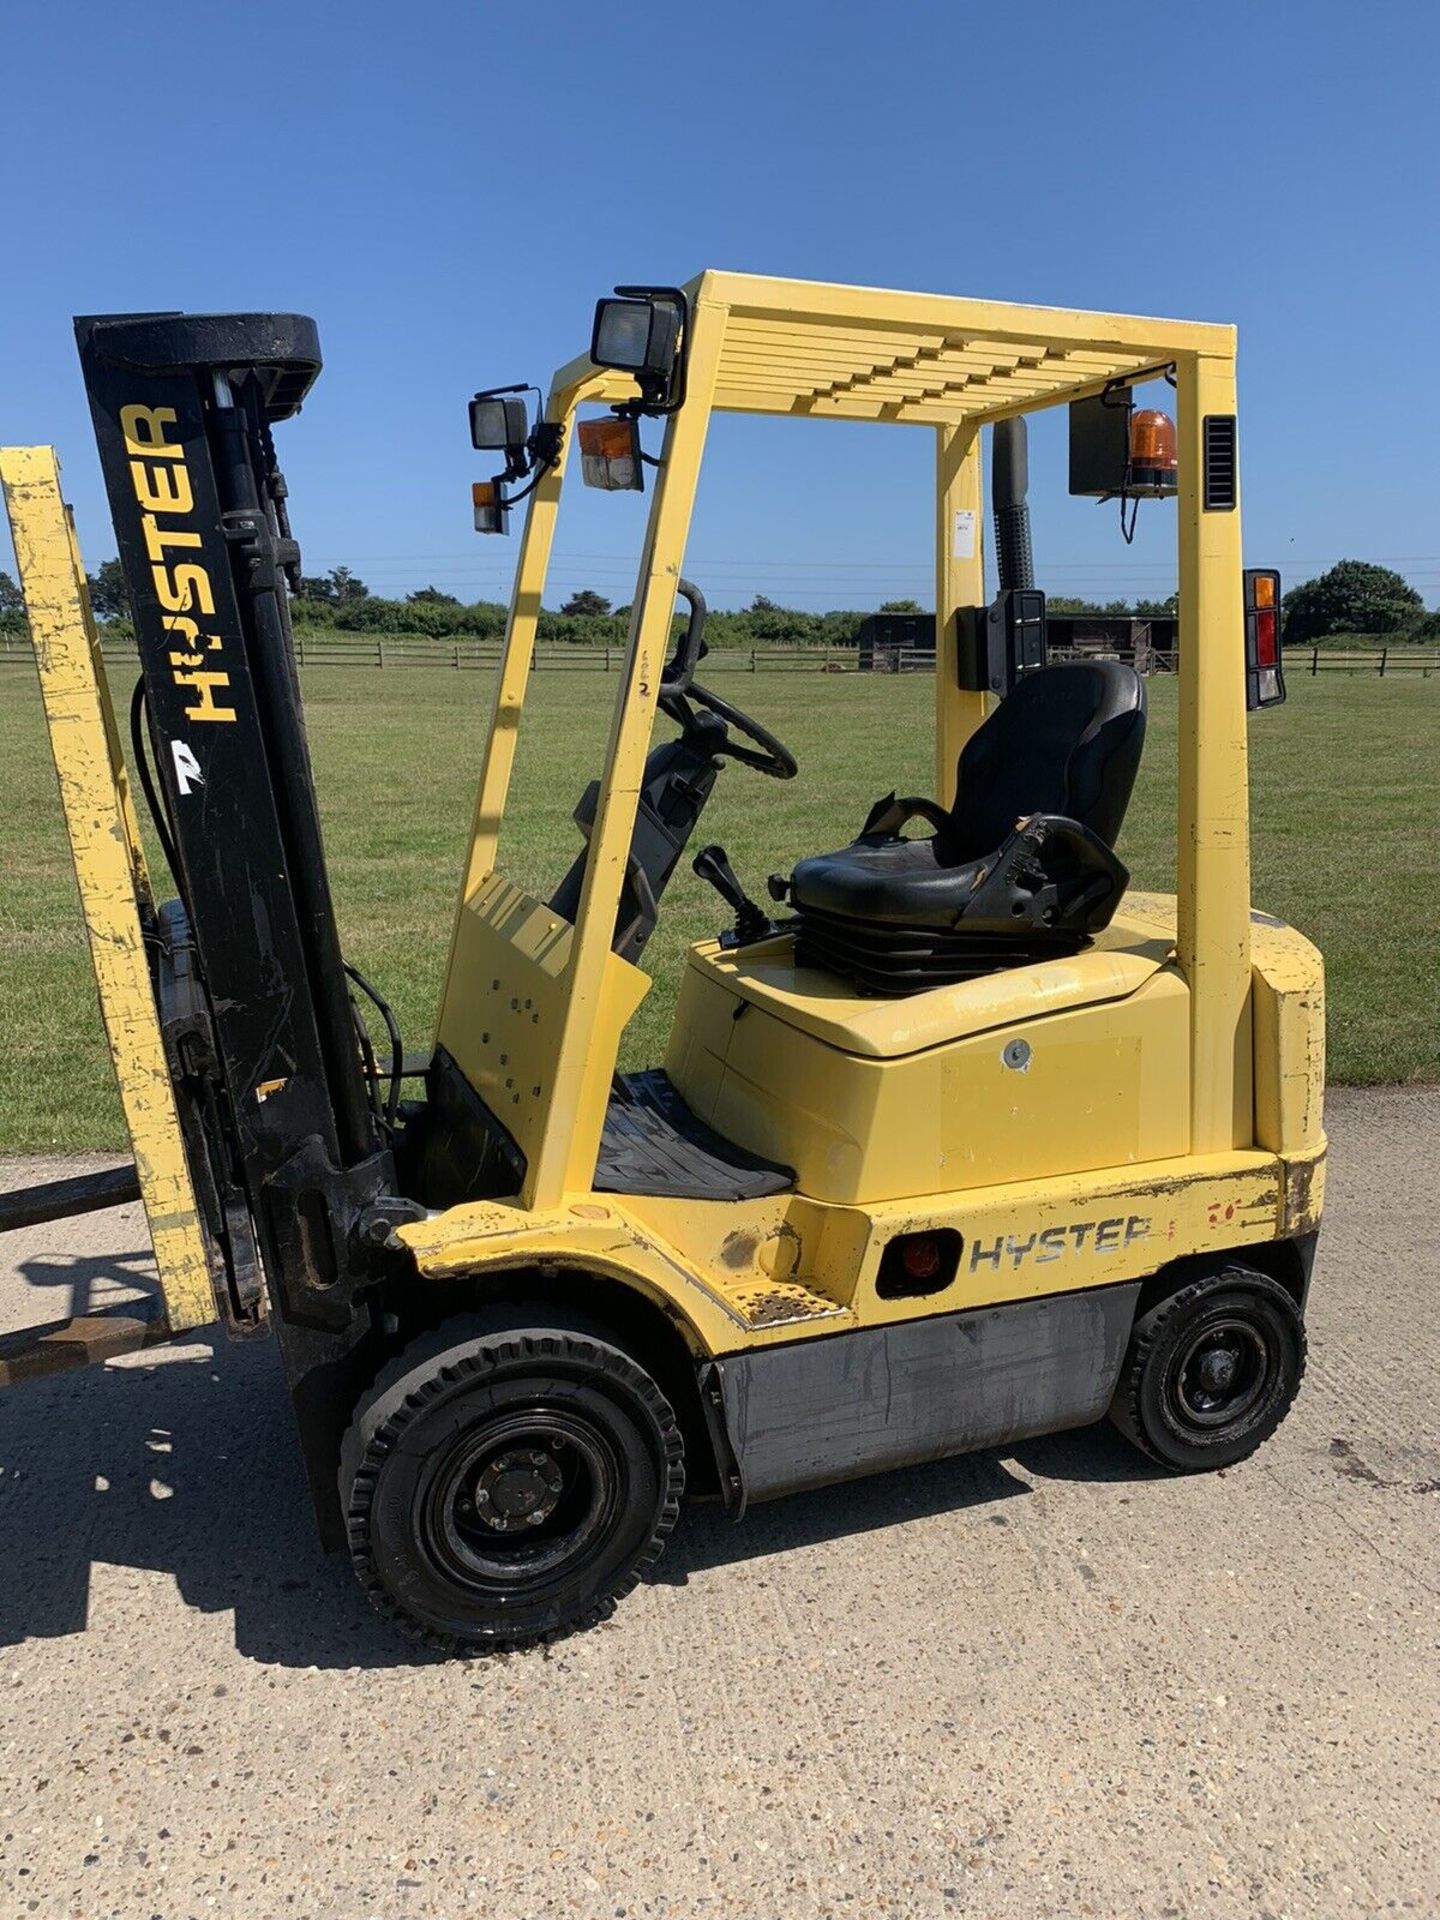 Hyster 1.5 Tonne Diesel Forklift Container Spec Compact Truck - Image 2 of 4